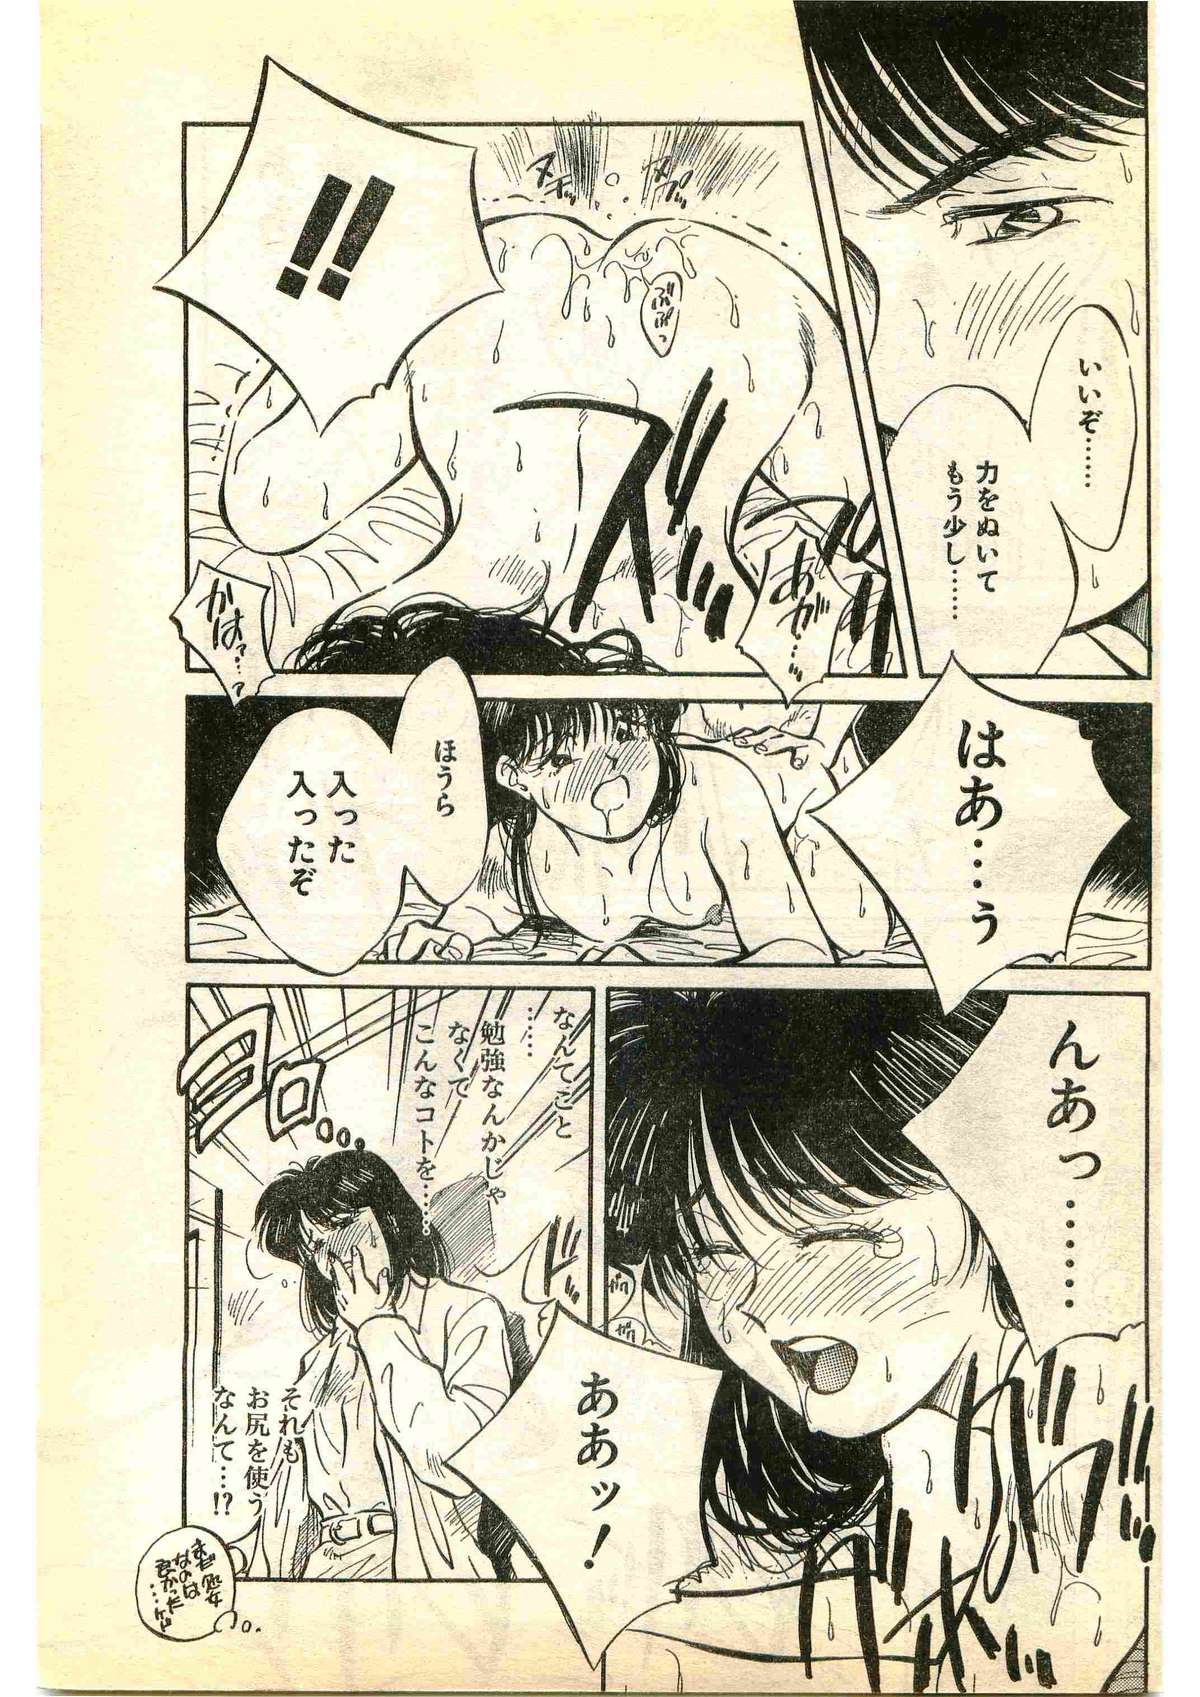 COMIC Papipo Gaiden 1995-01 page 31 full